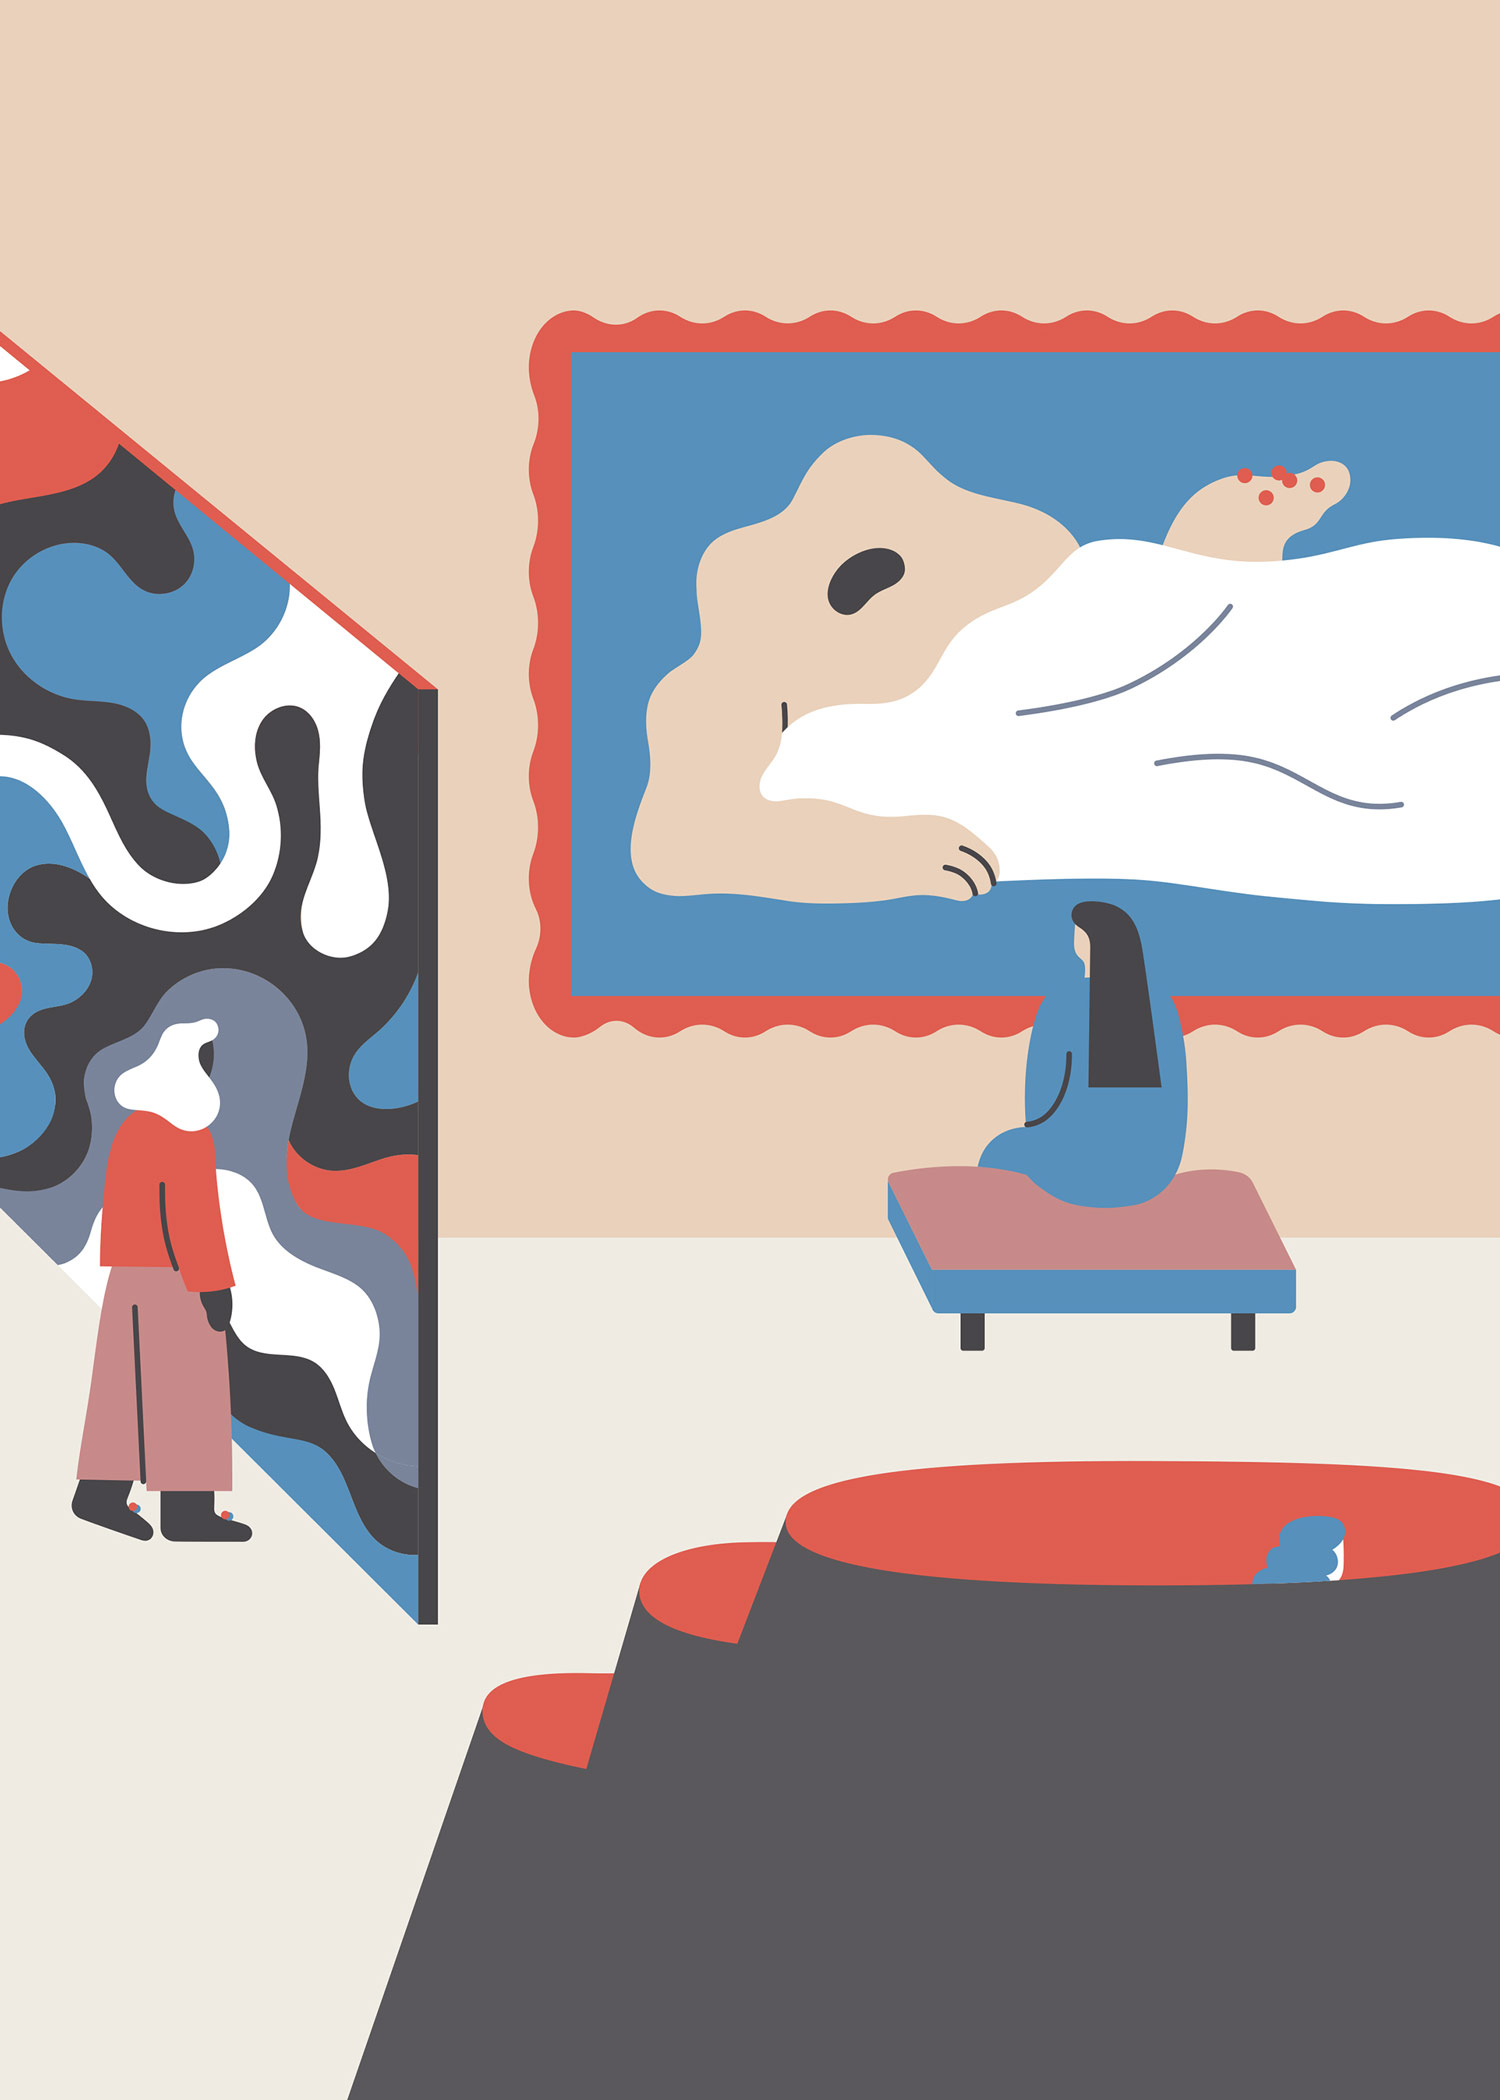 Illustration for the Headspace blog